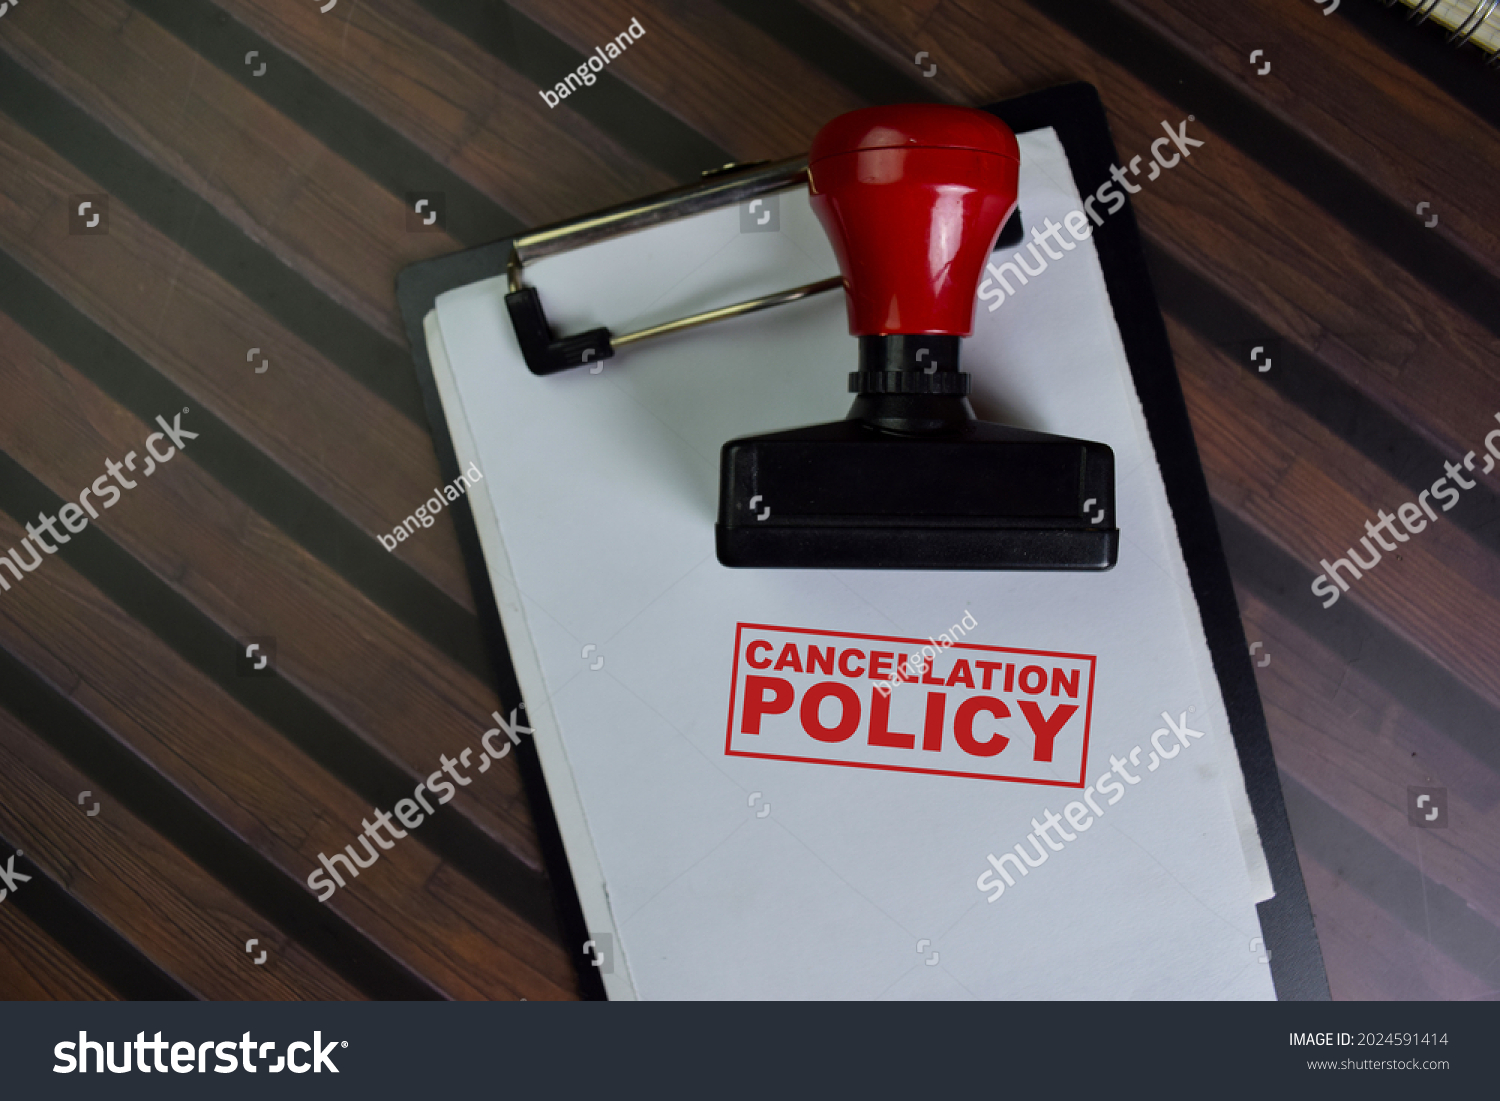 Red Handle Rubber Stamper and Cancellation Policy text isolated on wooden table. #2024591414